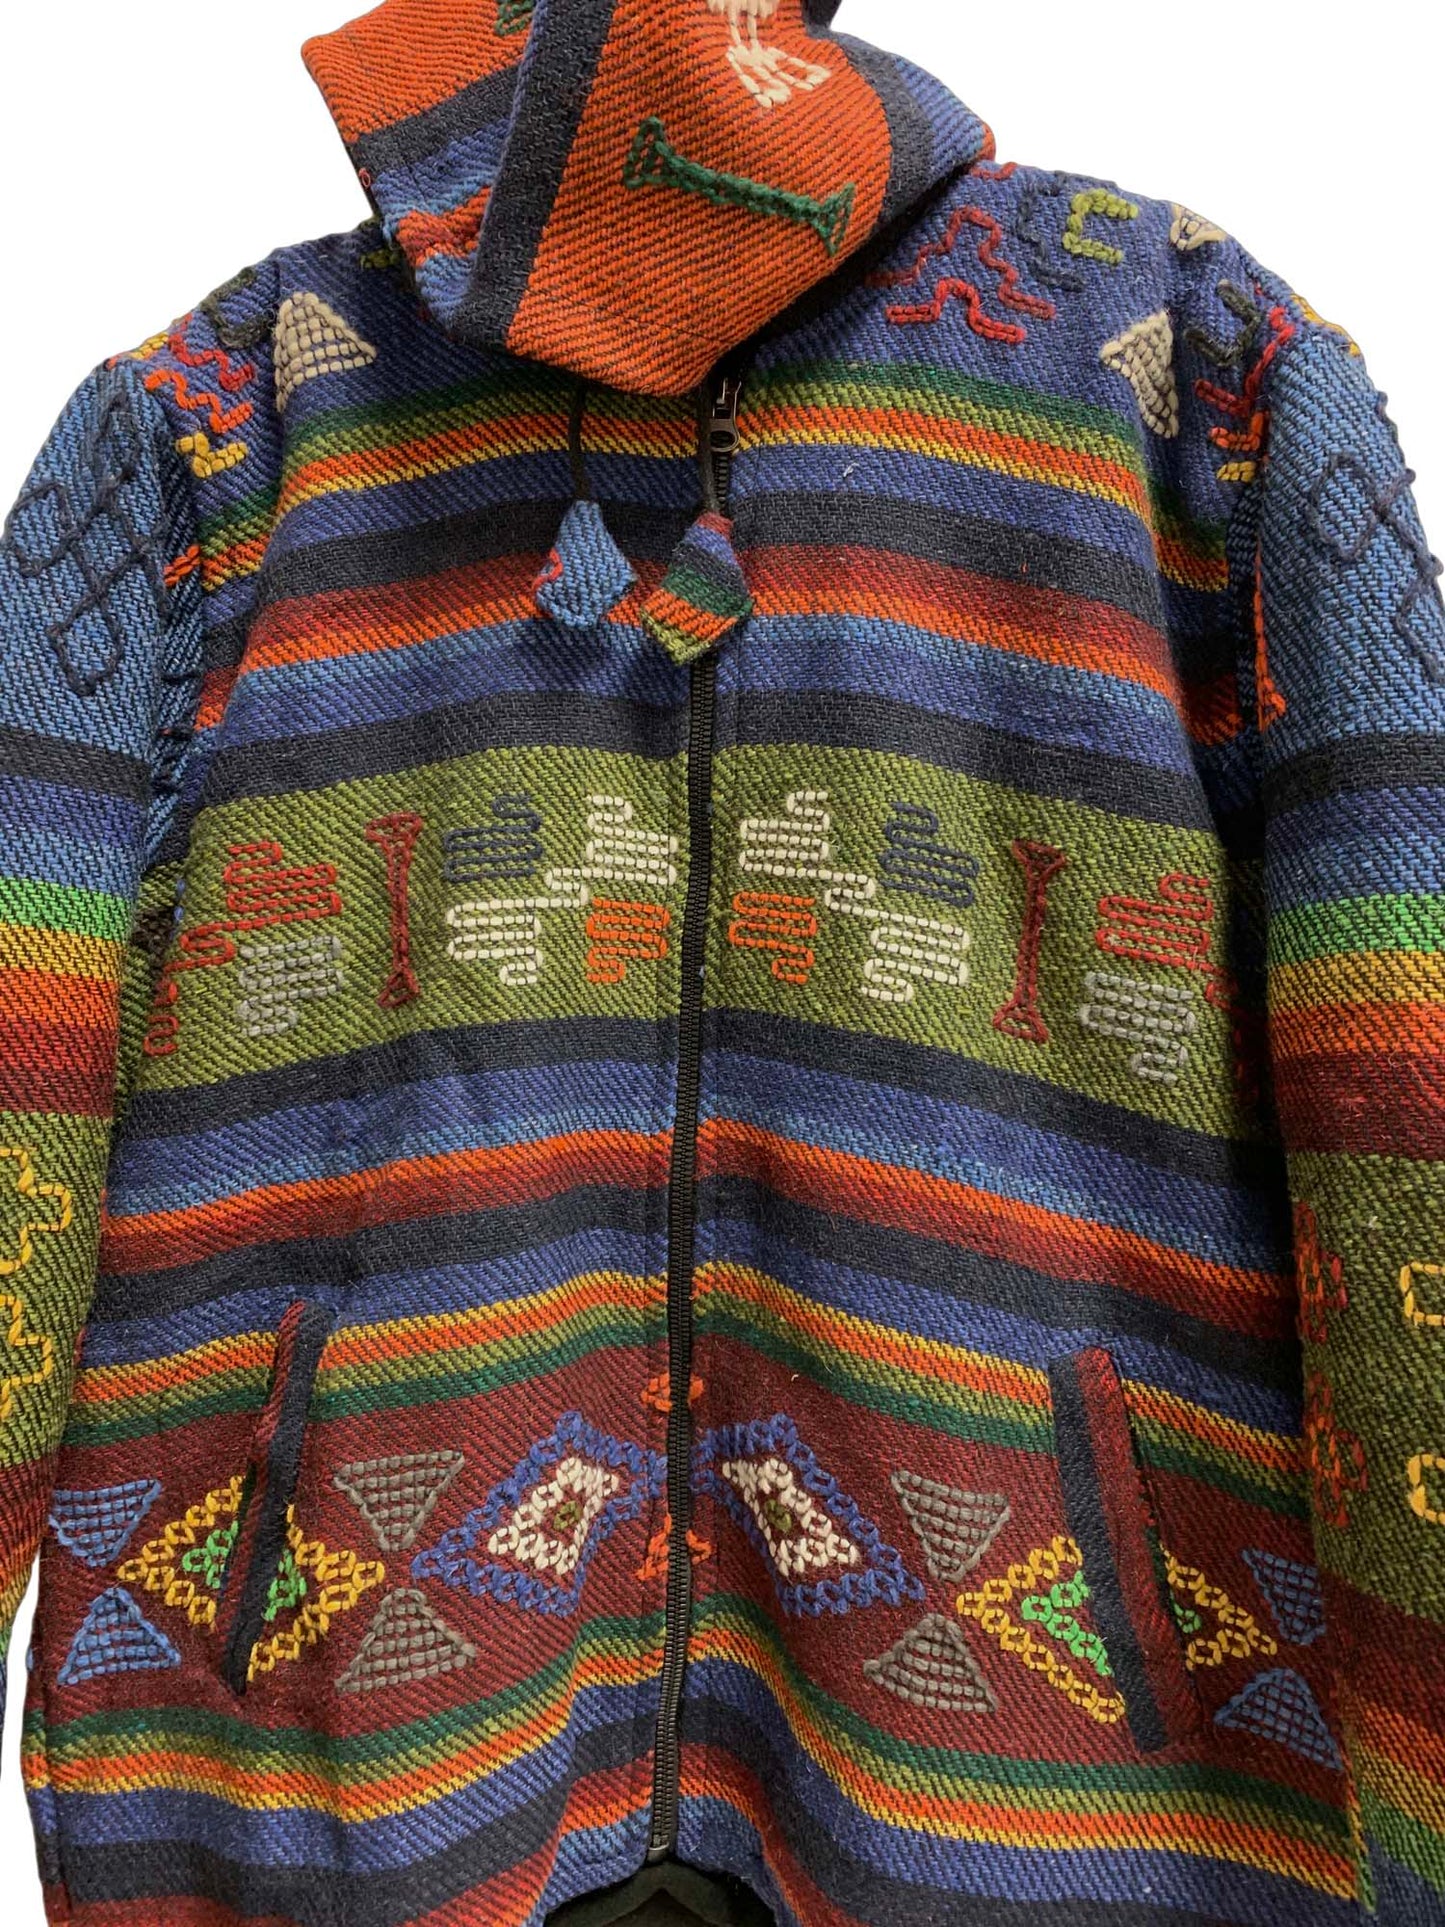 Men's Ethnic Tribal Hand Woven Embroidered Pure Wool Bhutan Jacket - Ambali Fashion Jackets bohemian, boho, casual, classic, ethnic, gypsy, hippie, indian, new age, sixties, traditional, tren